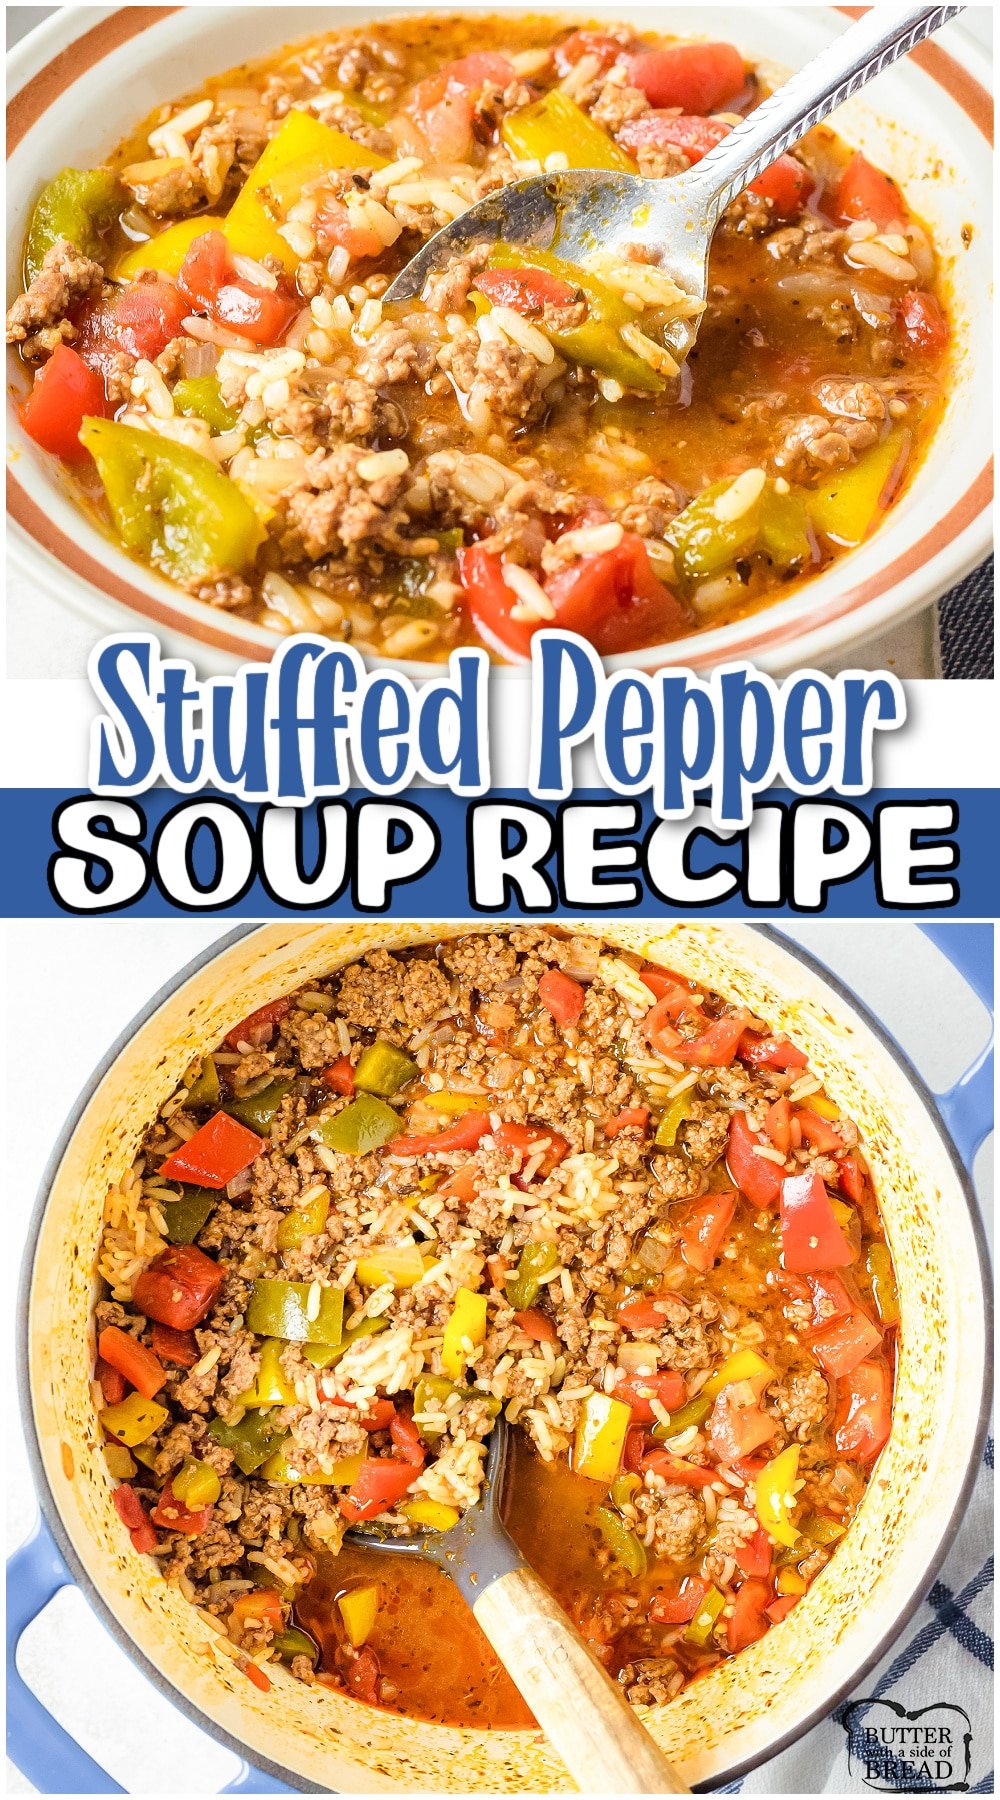 0 Minute Stuffed Pepper Soup is a flavorful meal made in just 30-minutes, it is perfect for family weeknight dinners. This hearty Stuffed Pepper Soup recipe is packed with juicy meat, rice, onions, and bell peppers. This soup is super filling and delicious, everyone will leave the dinner table satisfied.